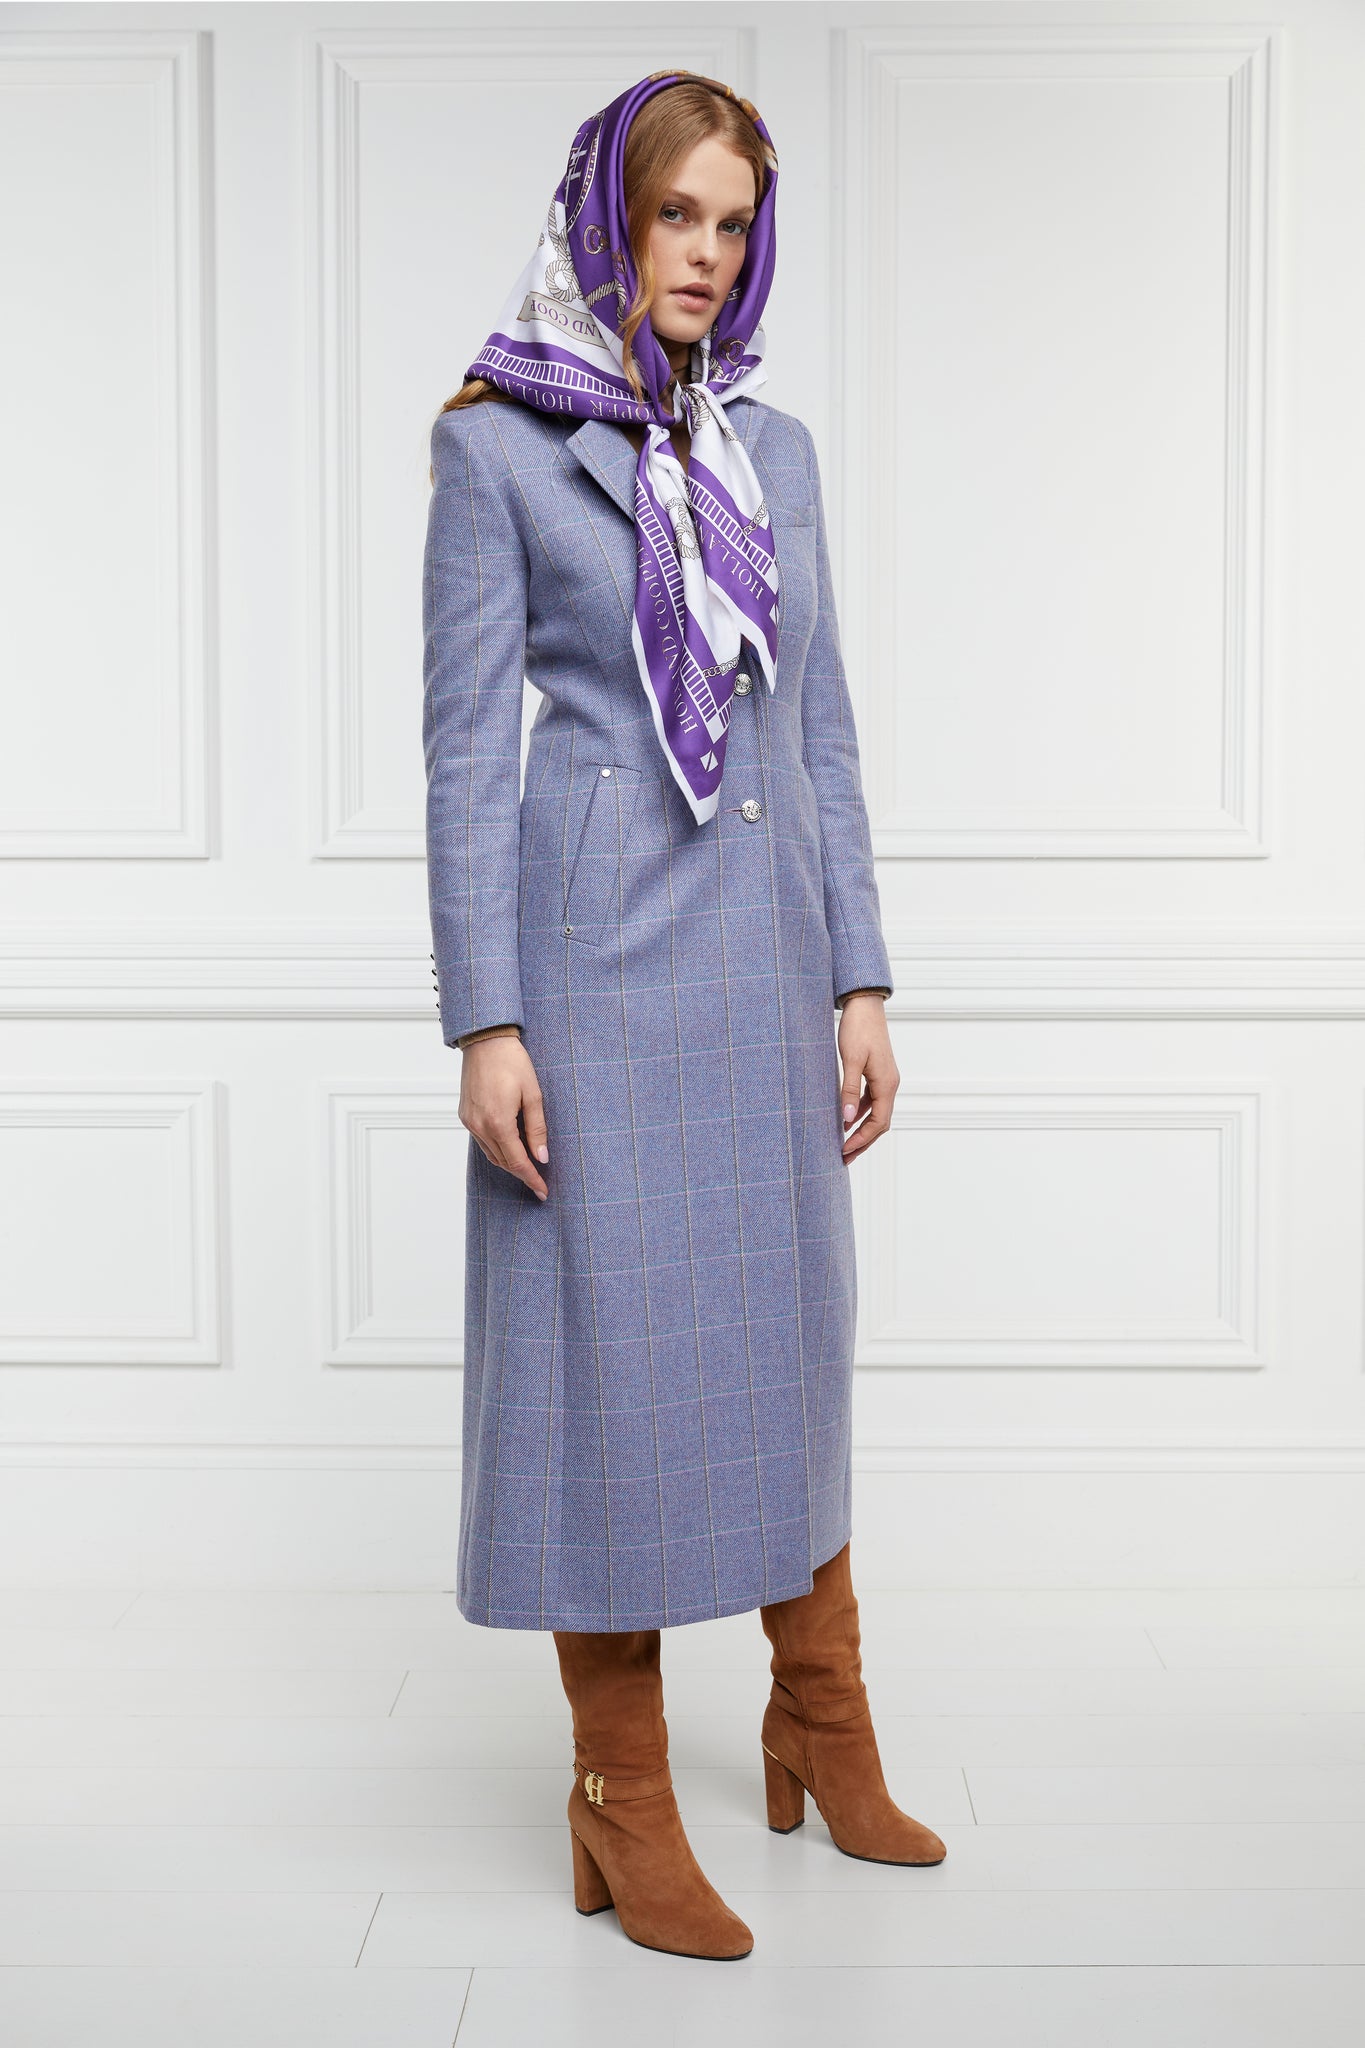 womens purple, grey and blue check single breasted full length wool coat with purple and over hair UK made white silk scarf